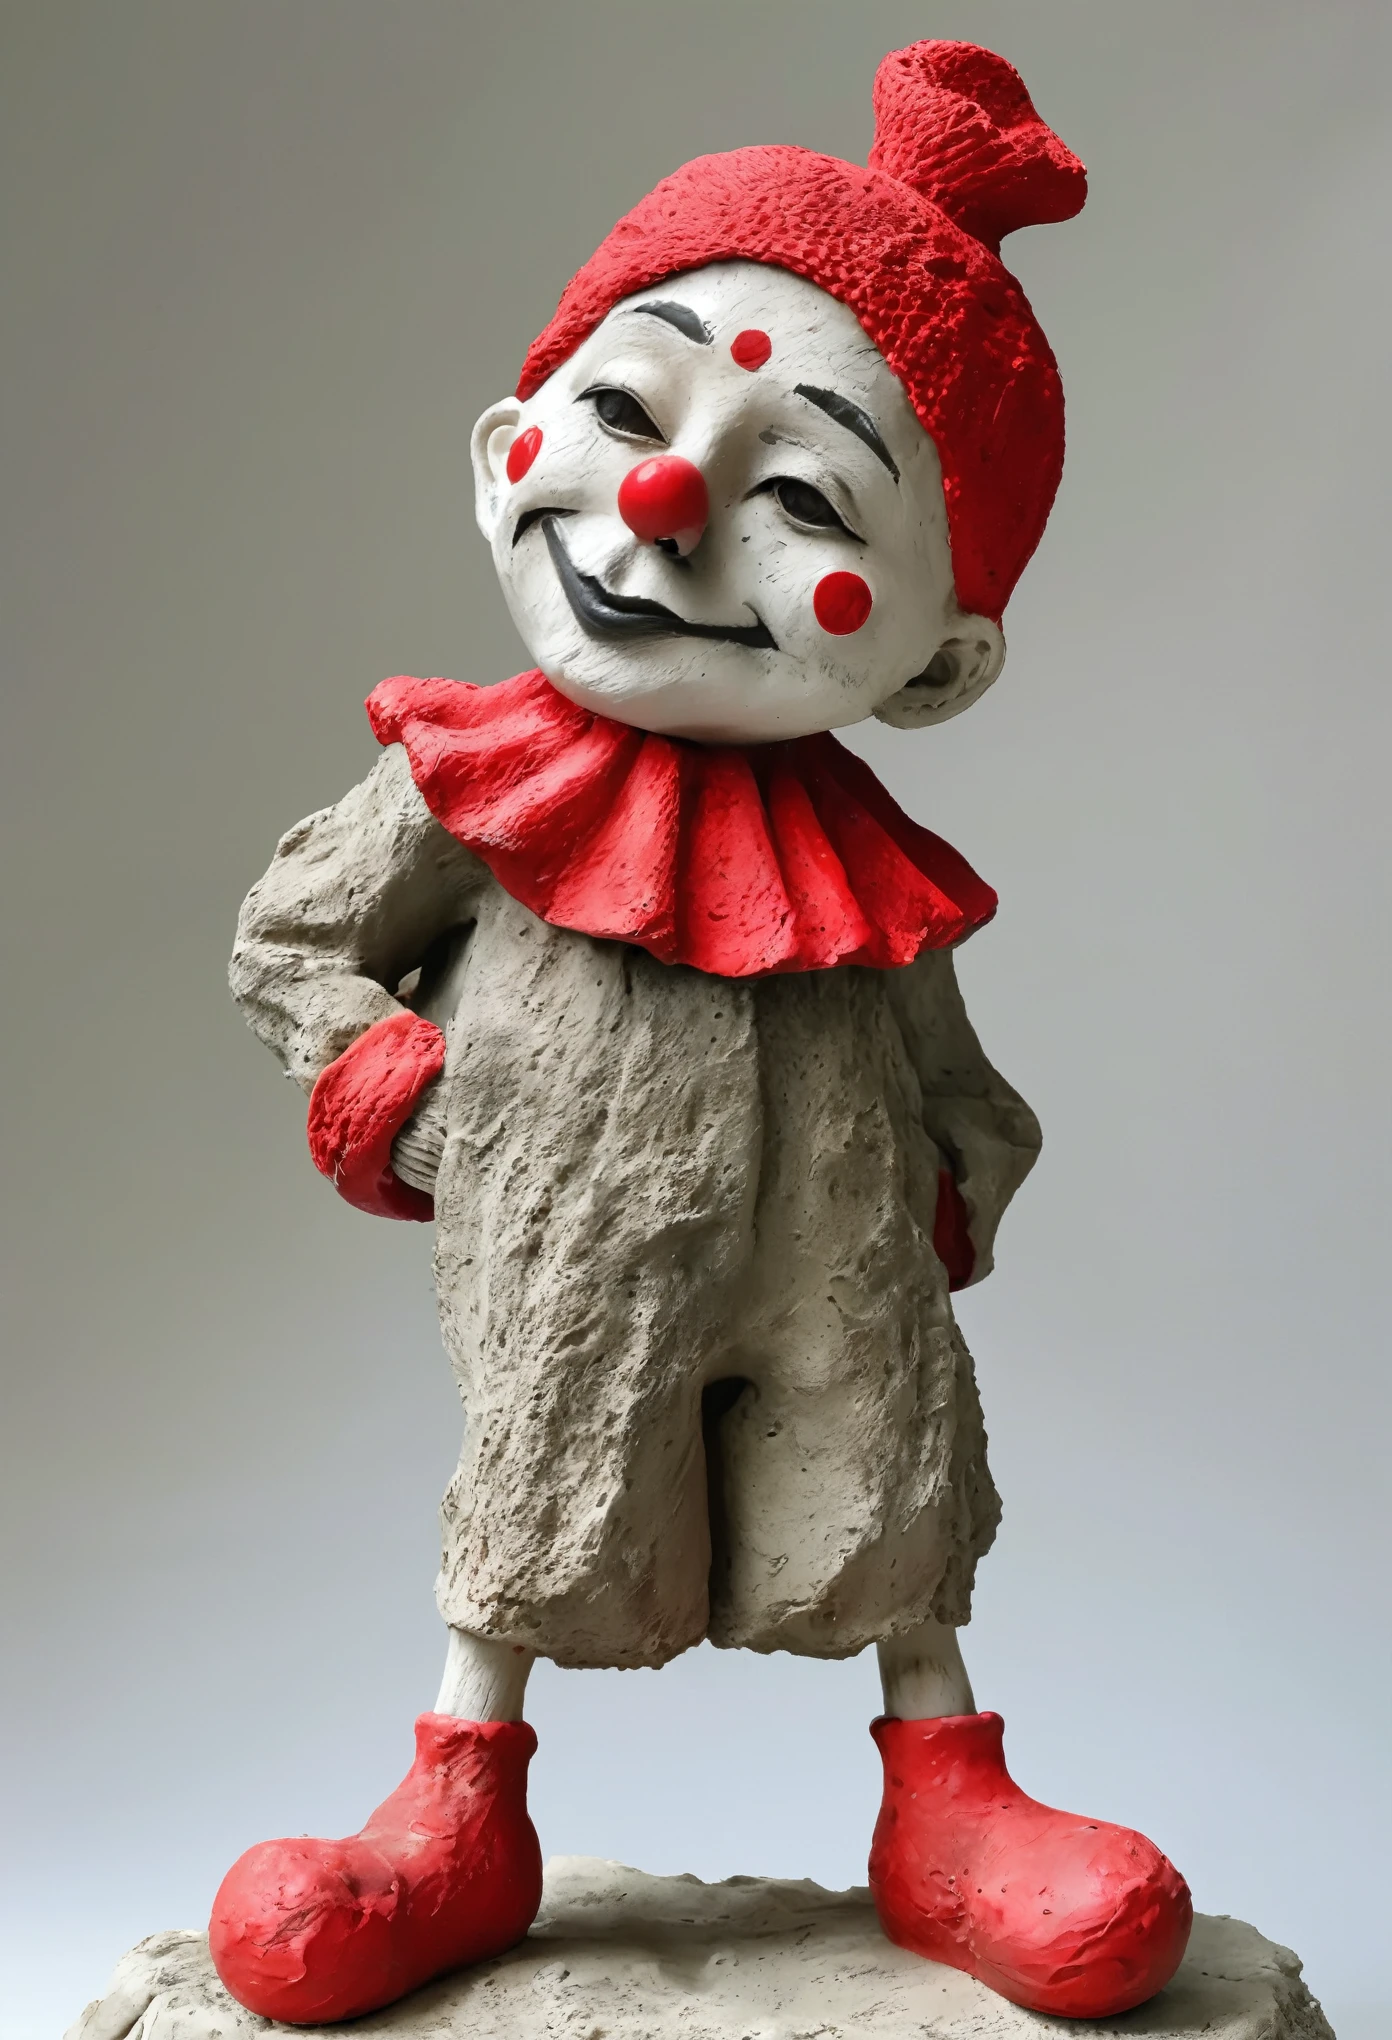 (best quality:1.2),ultra-light Clay, Clay, Pottery, Rough knitted texture, distressed, dirty, mineral pigments, 3D Clay sculpture art, Clay sculpture, Rough surface, (Art work，clown，Red nose，solitary figure，whole body，Barefoot，cover up,Solitary,)